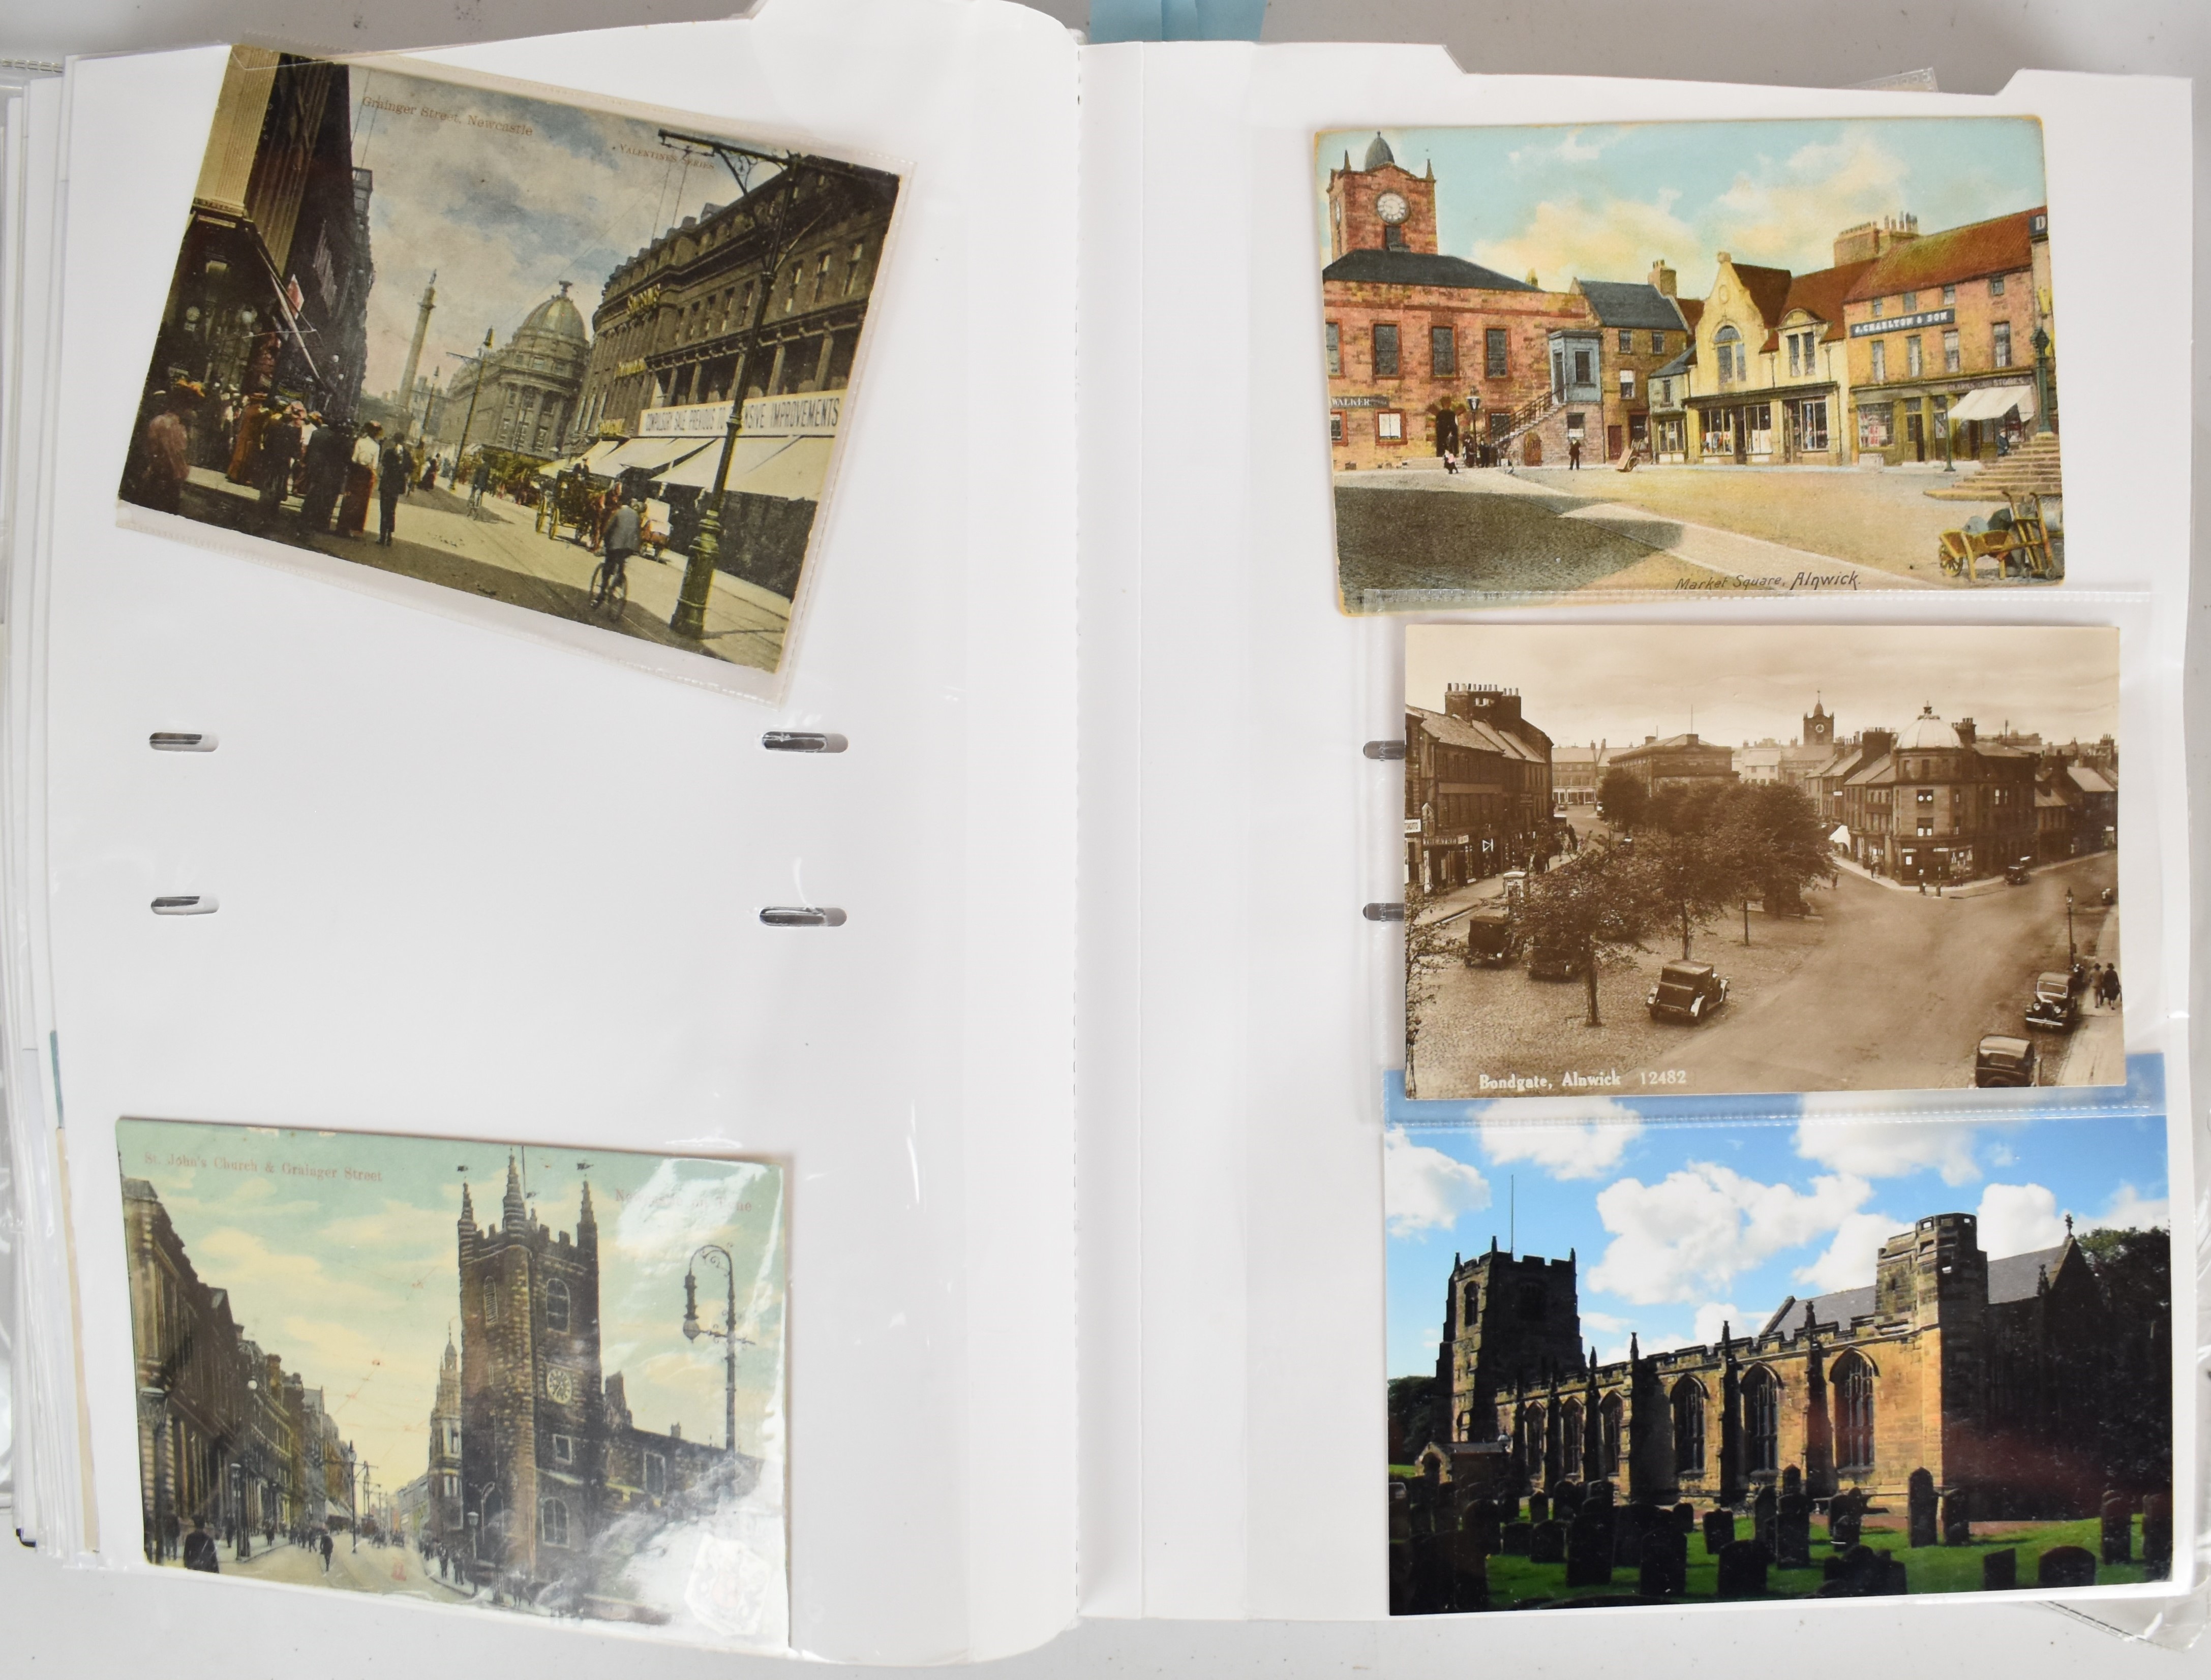 Two albums of topographical postcards including York, Ripon, Leeds, Manchester, Carlisle, Durham, - Image 5 of 9